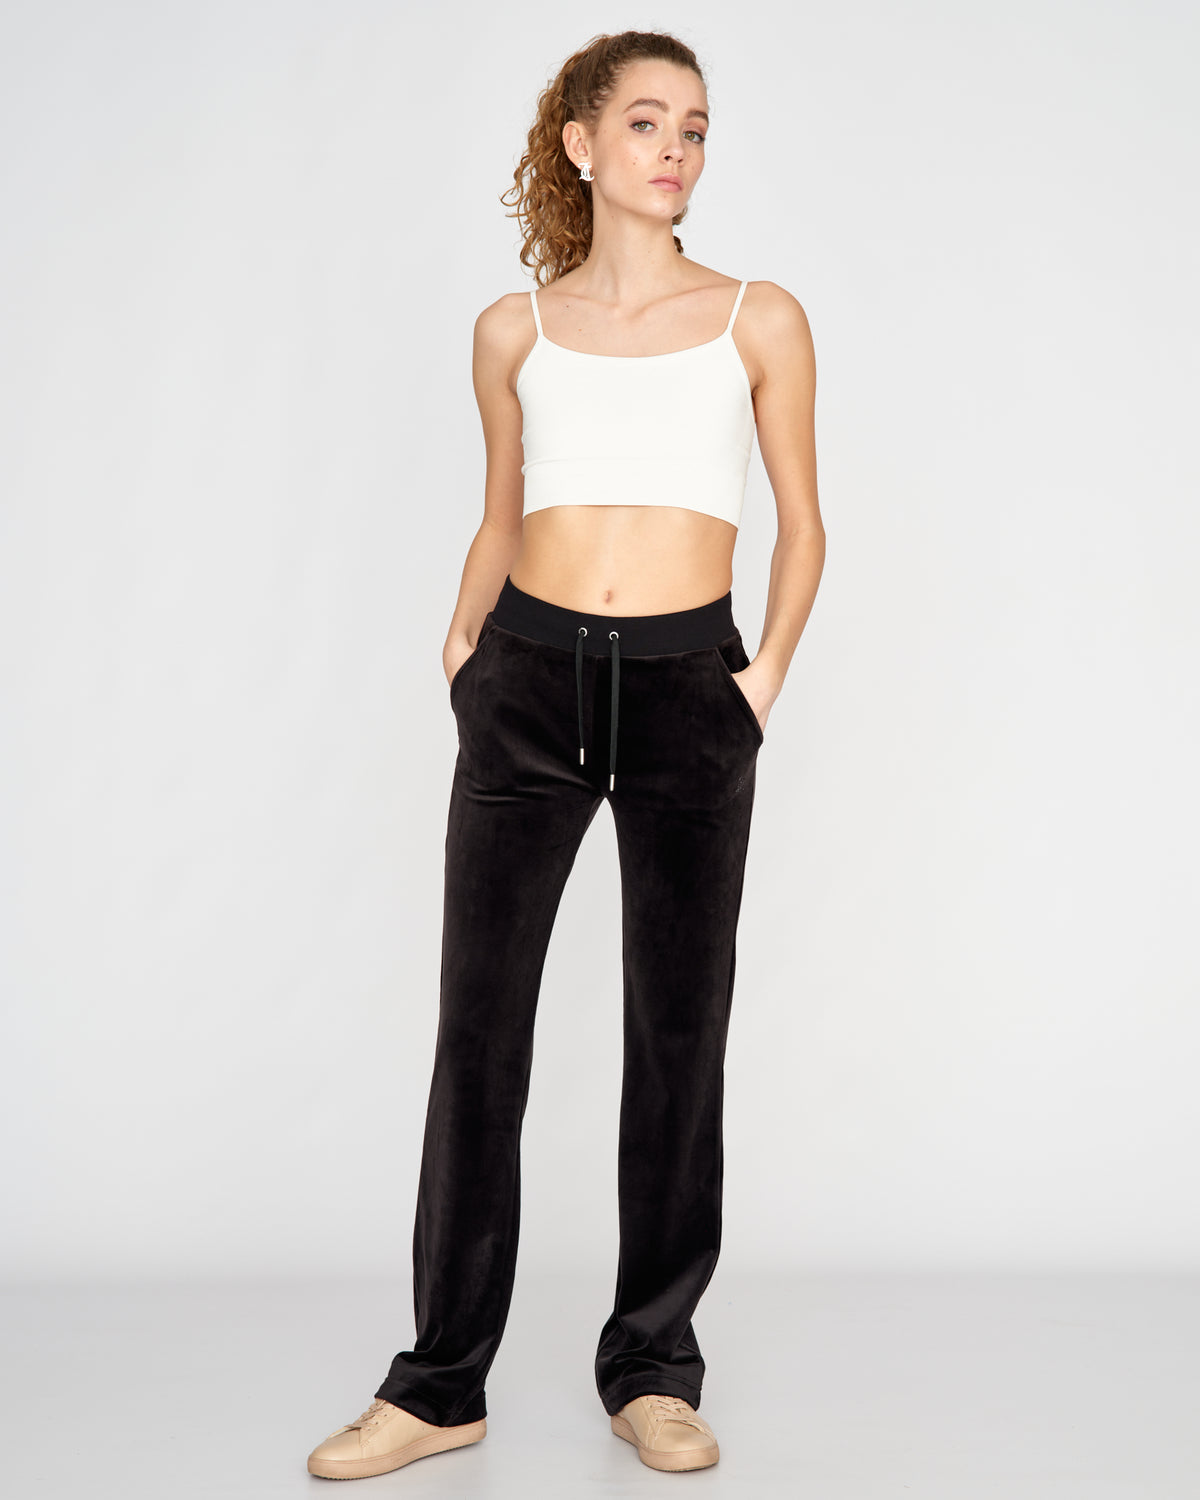 Classic Velour Arched Diamante Del Ray Pant Black - Juicy Couture Scandinavia